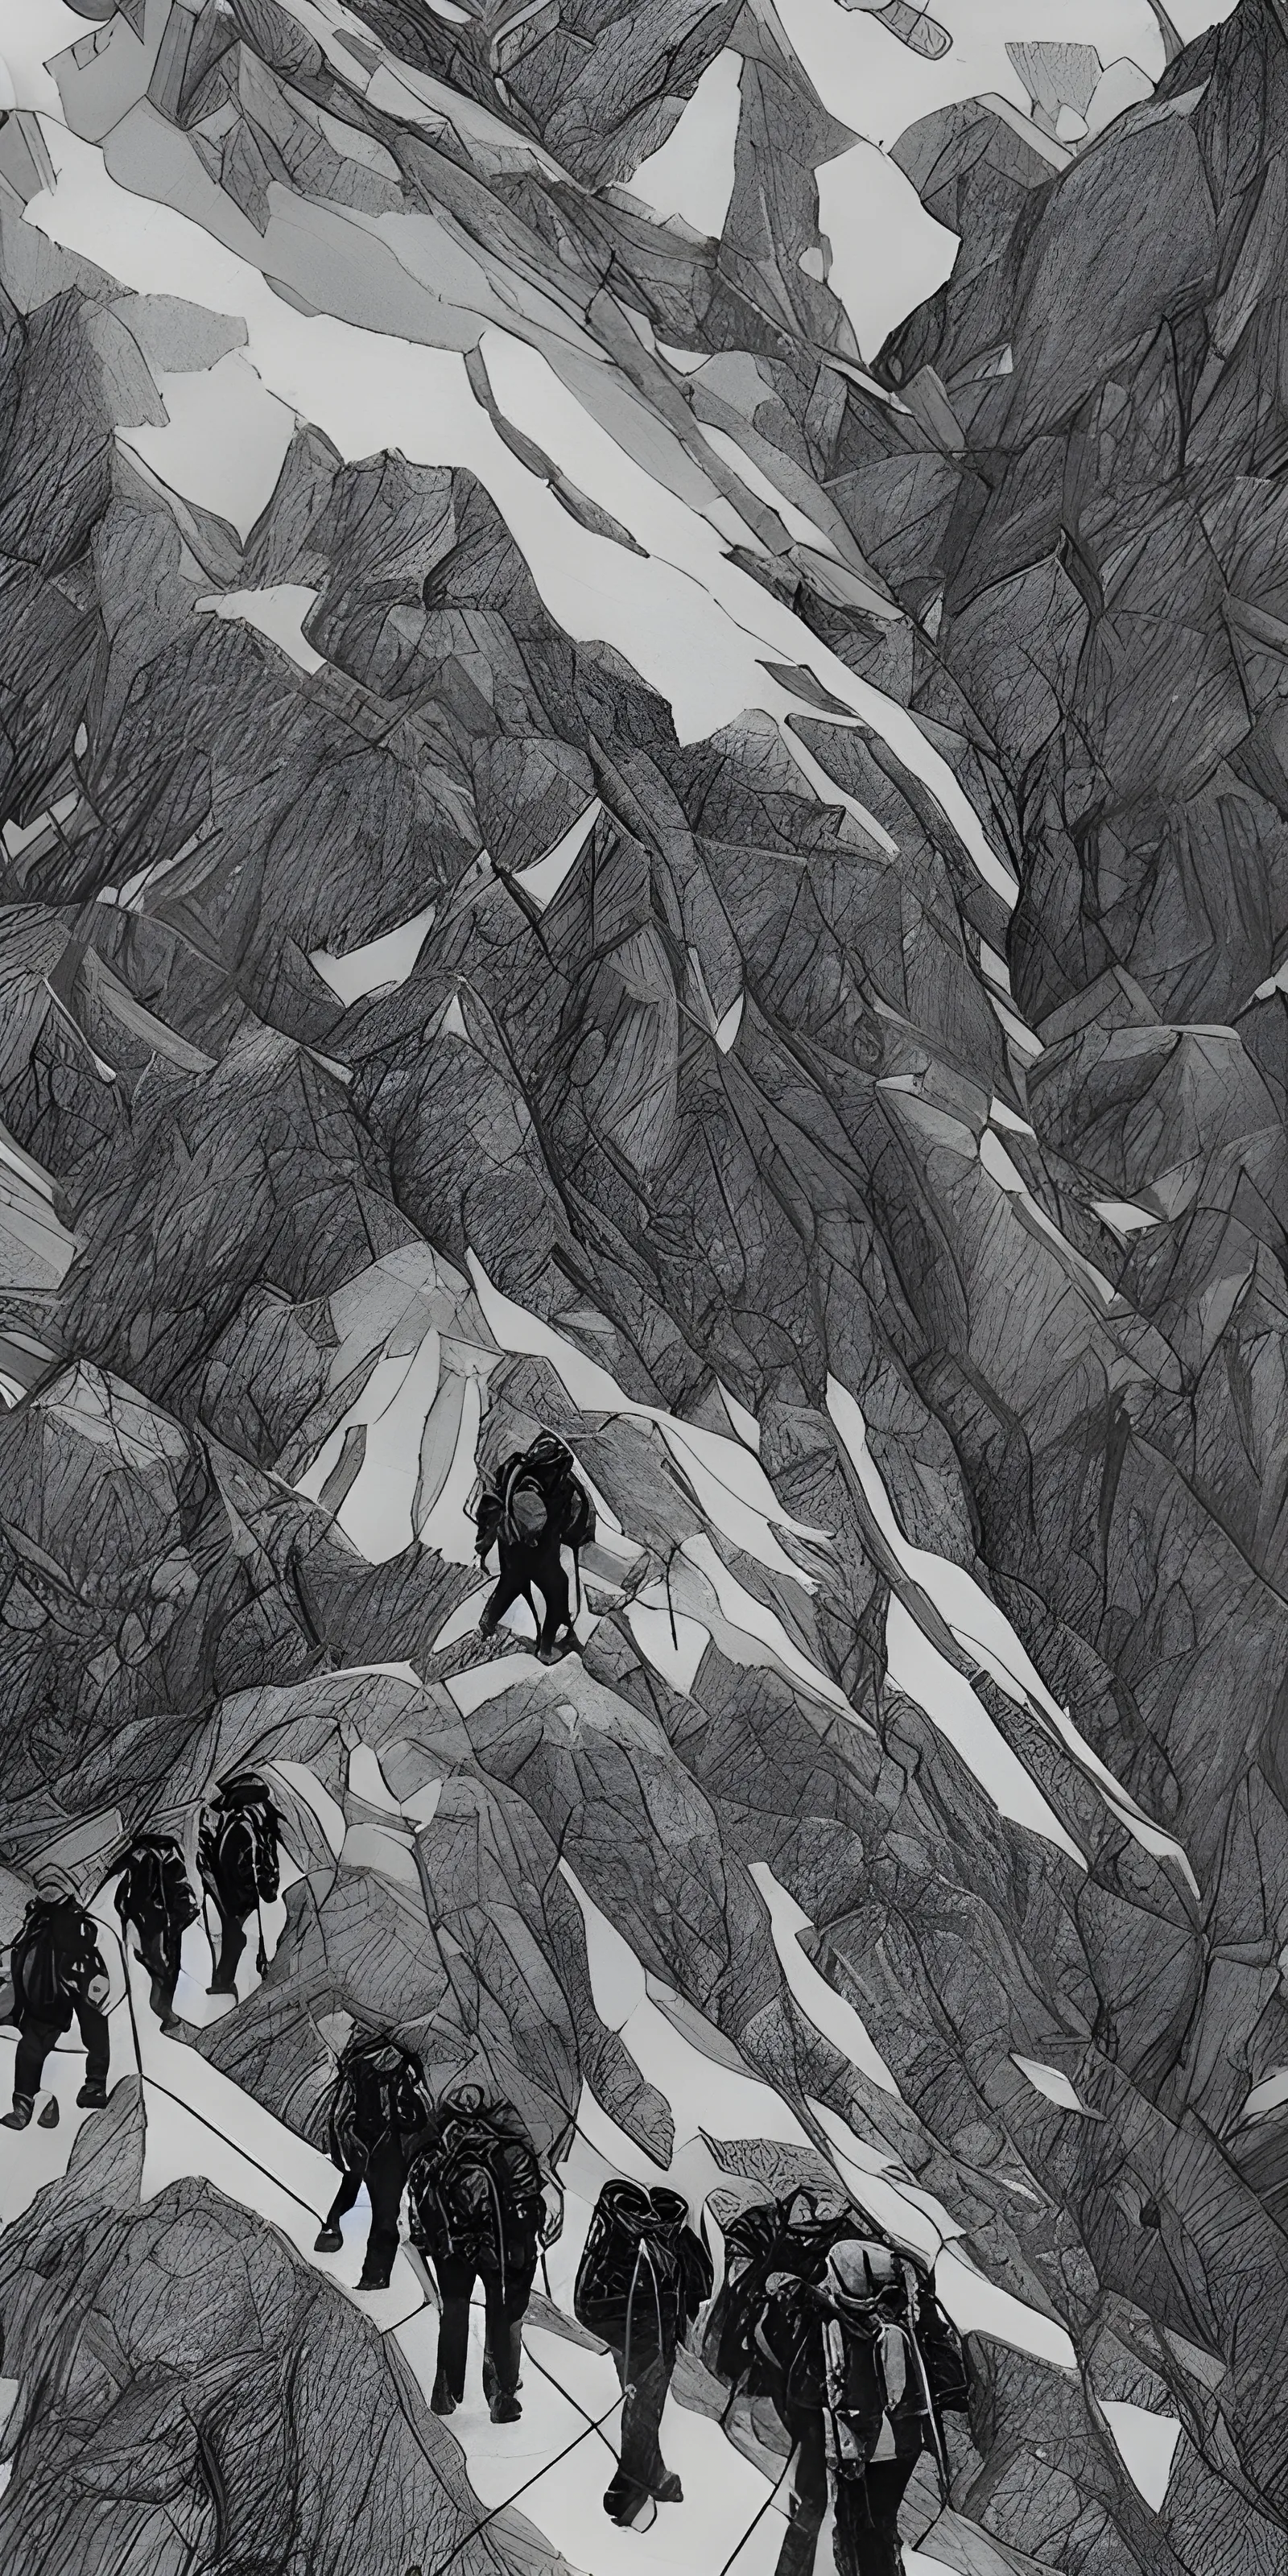 A group of people going up the mountain, in black and white.